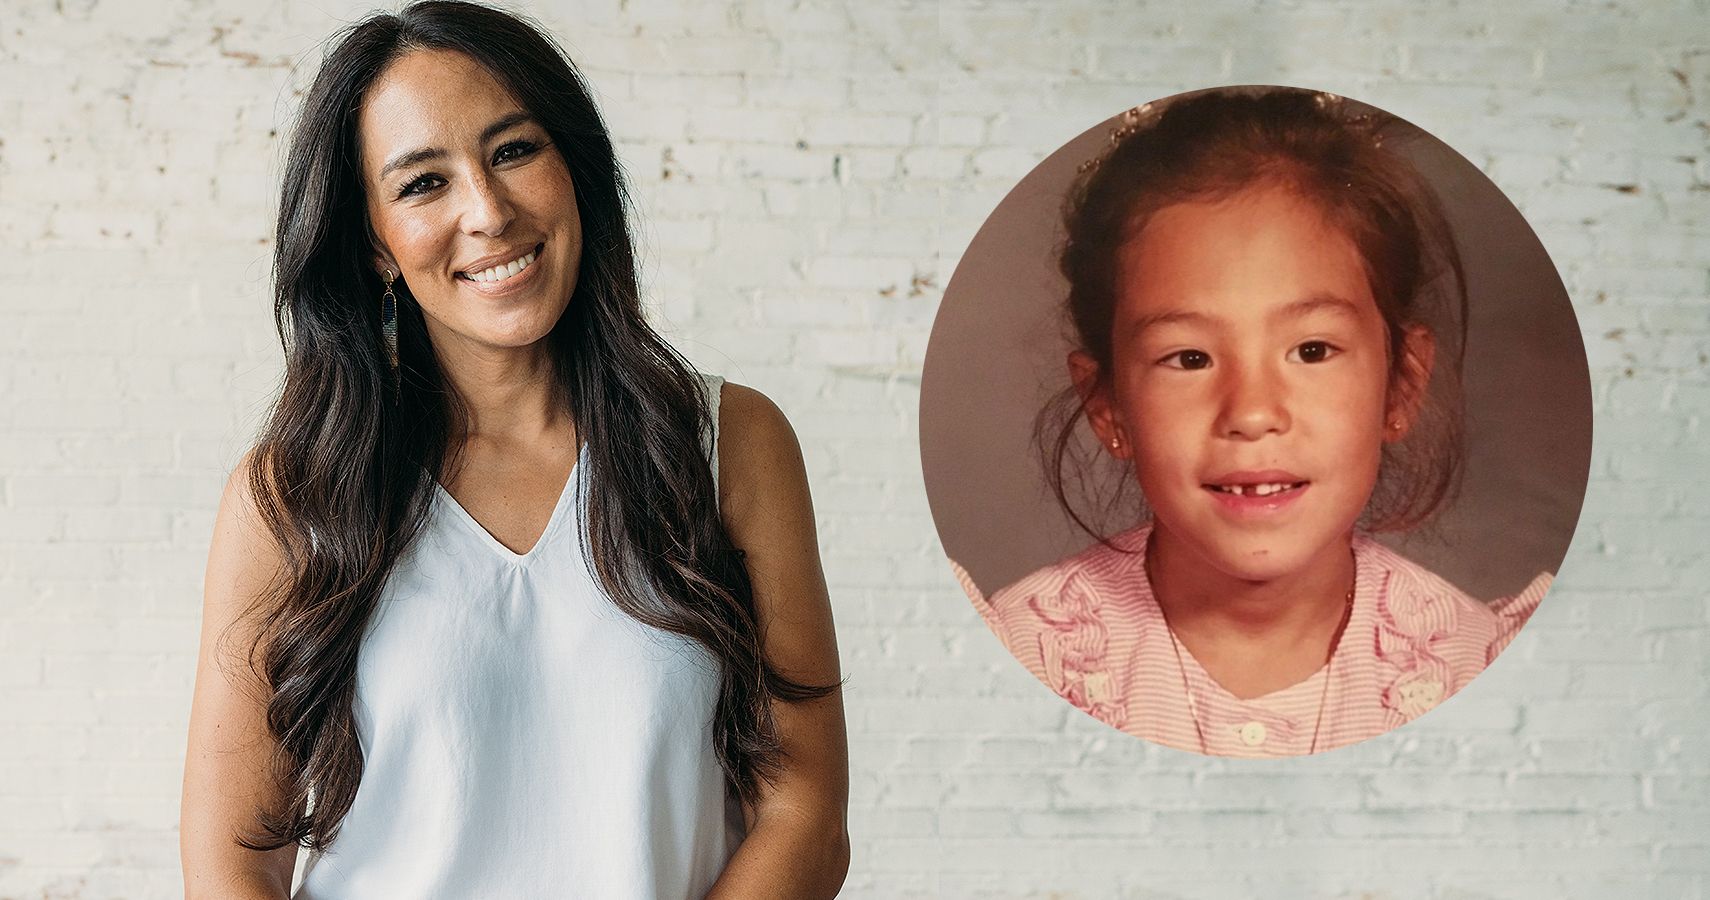 ‘Fixer Upper’ Star Joanna Gaines Said She Was Teased As A Kid For “Being Asian”